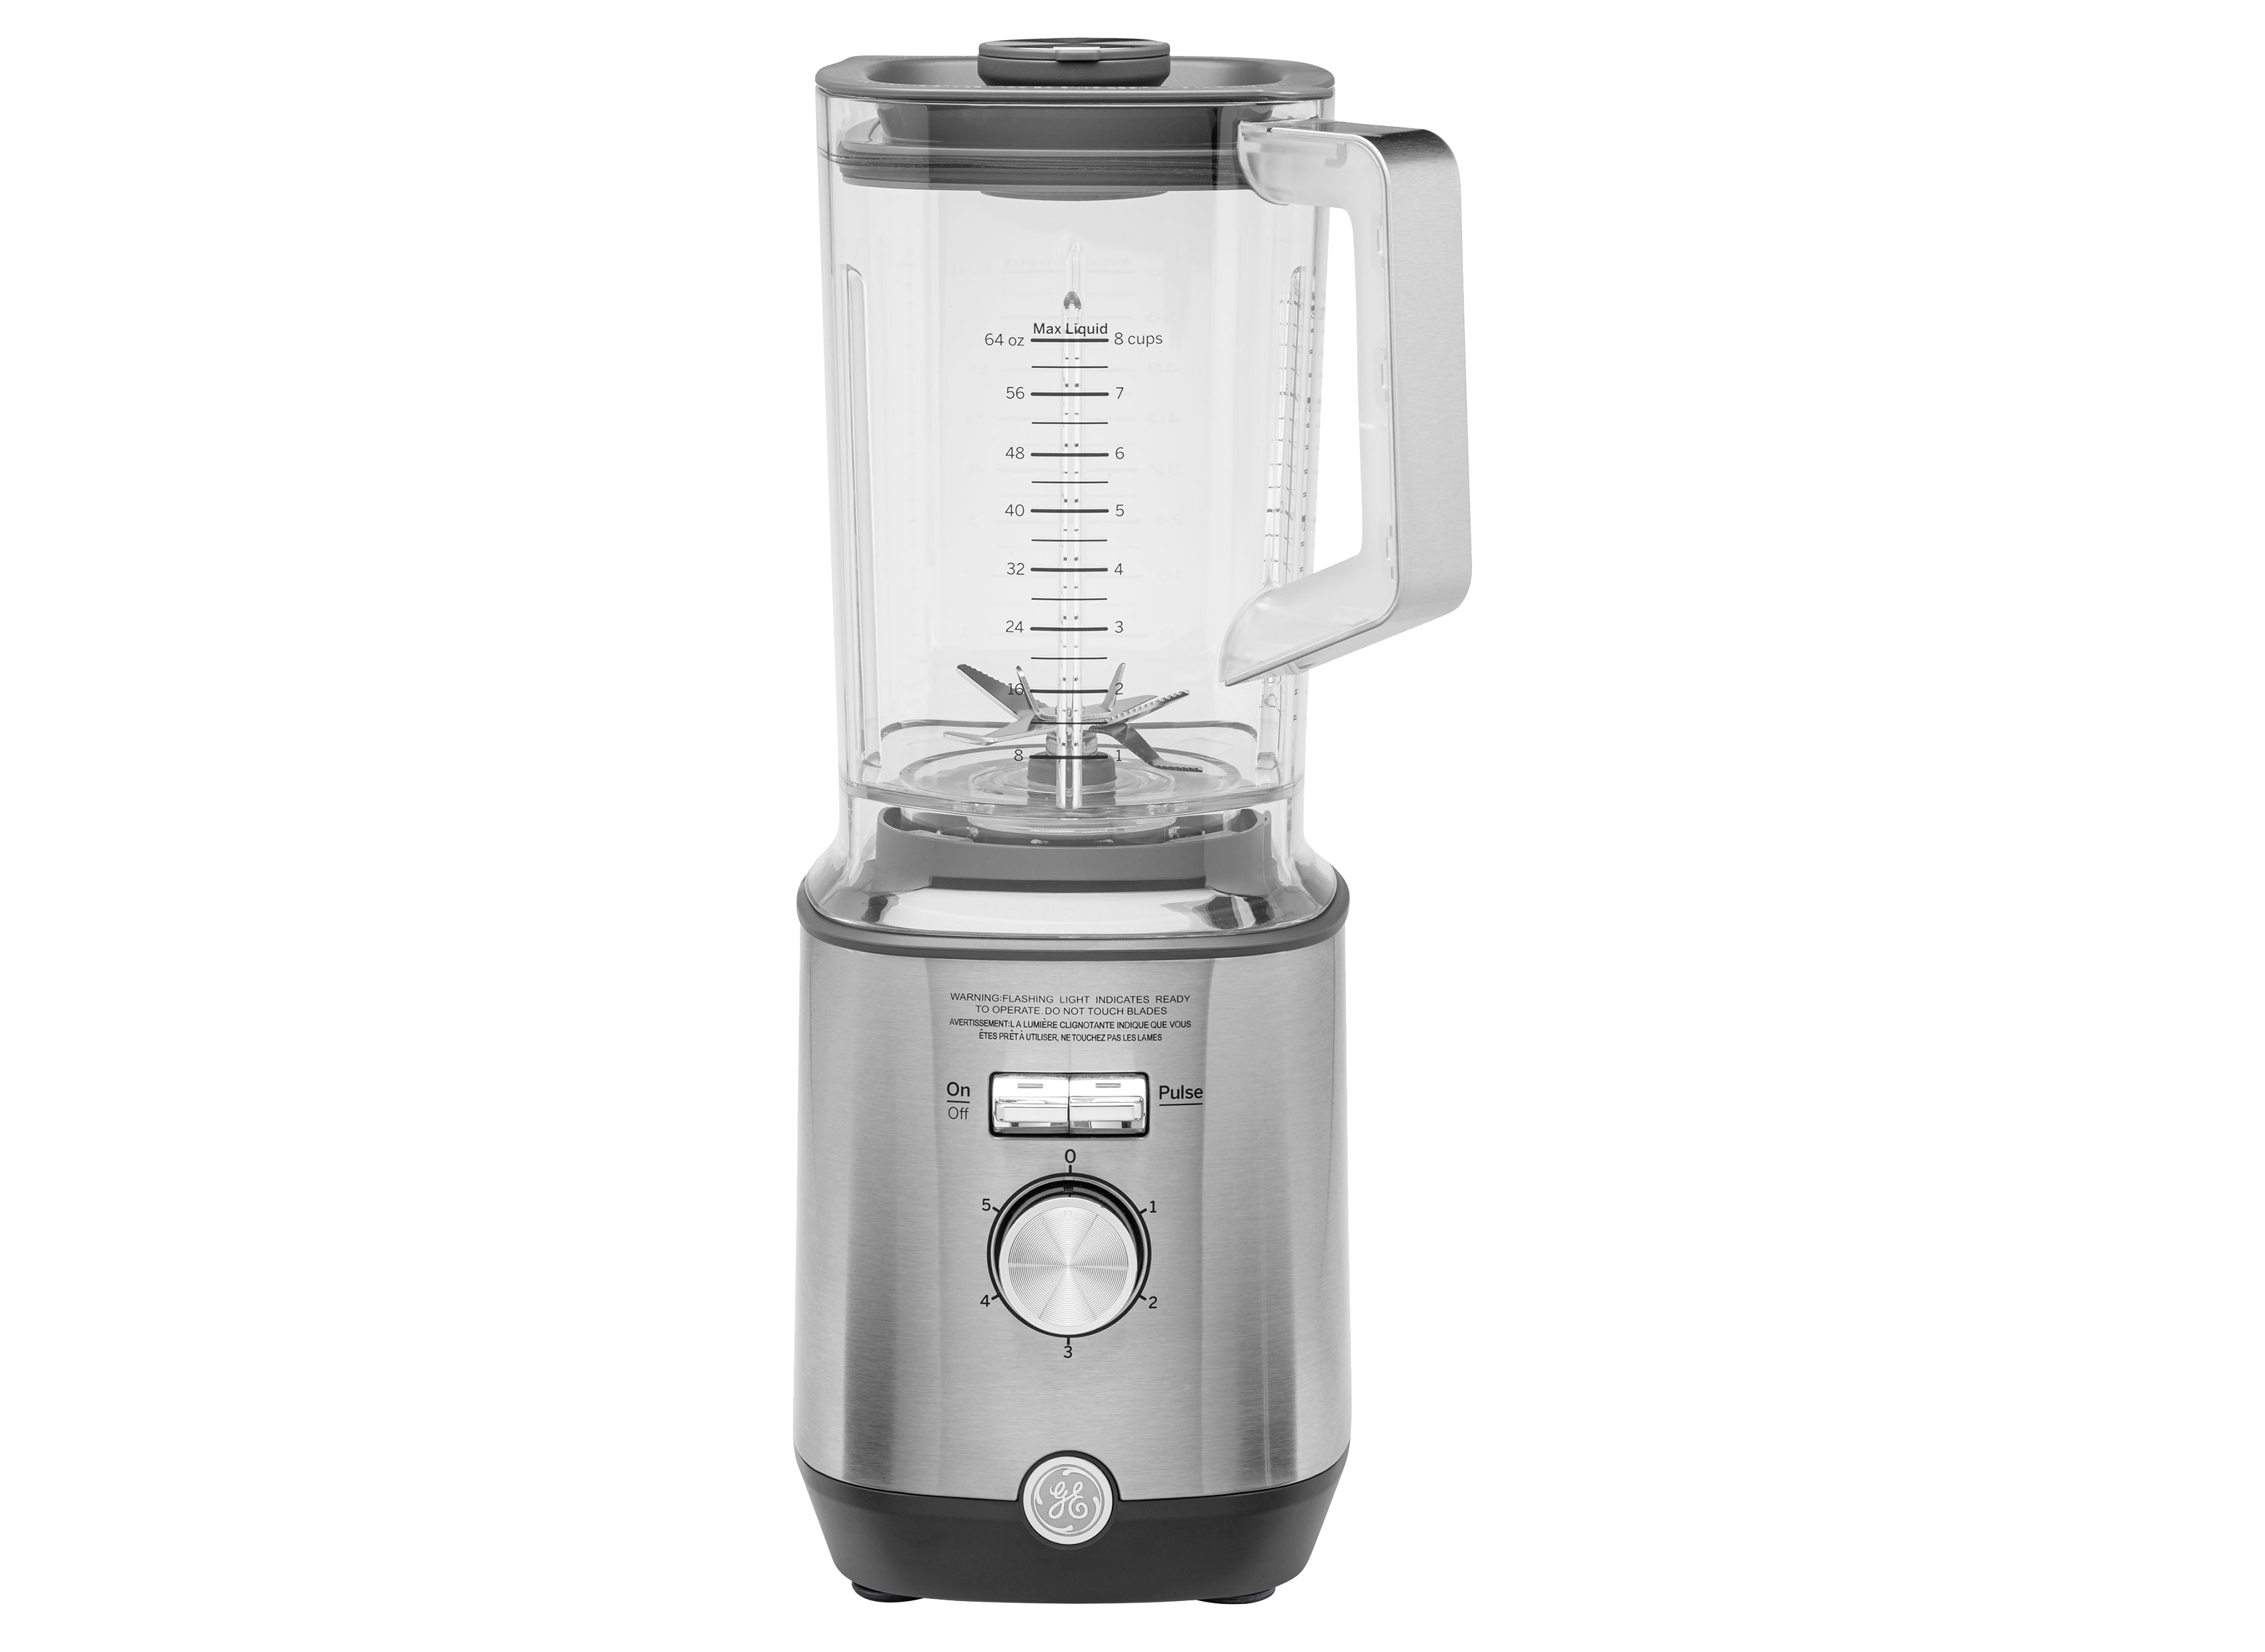 https://crdms.images.consumerreports.org/prod/products/cr/models/403974-full-sized-blenders-ge-g8bcaasspss-10020829.png